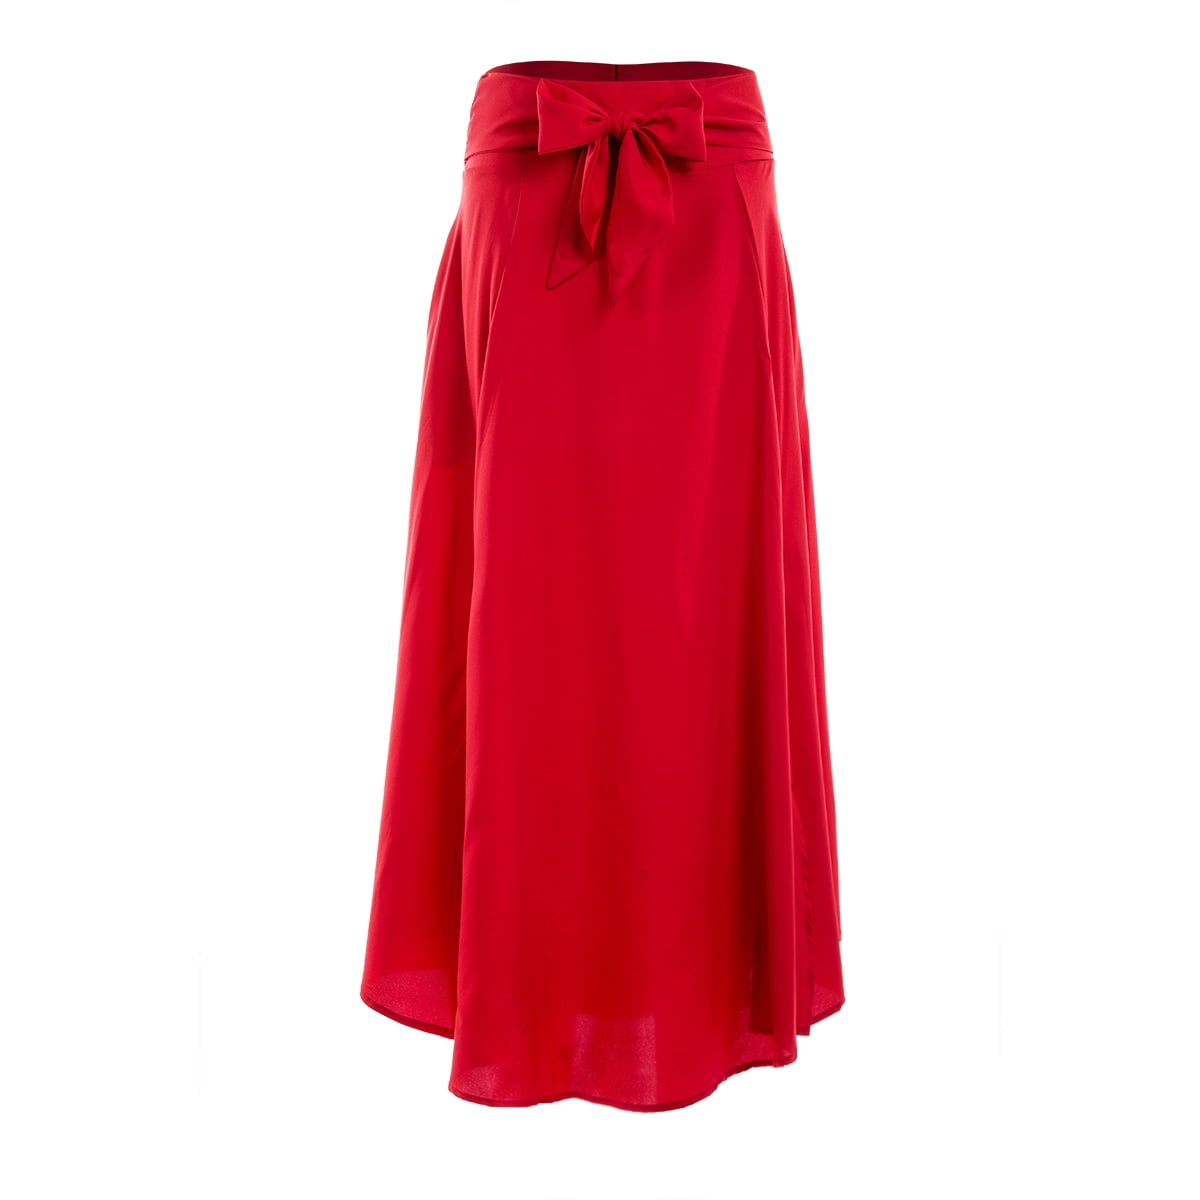 Womens High Waist Flared Pleated Long Skirt Sweet Bow Solid Color